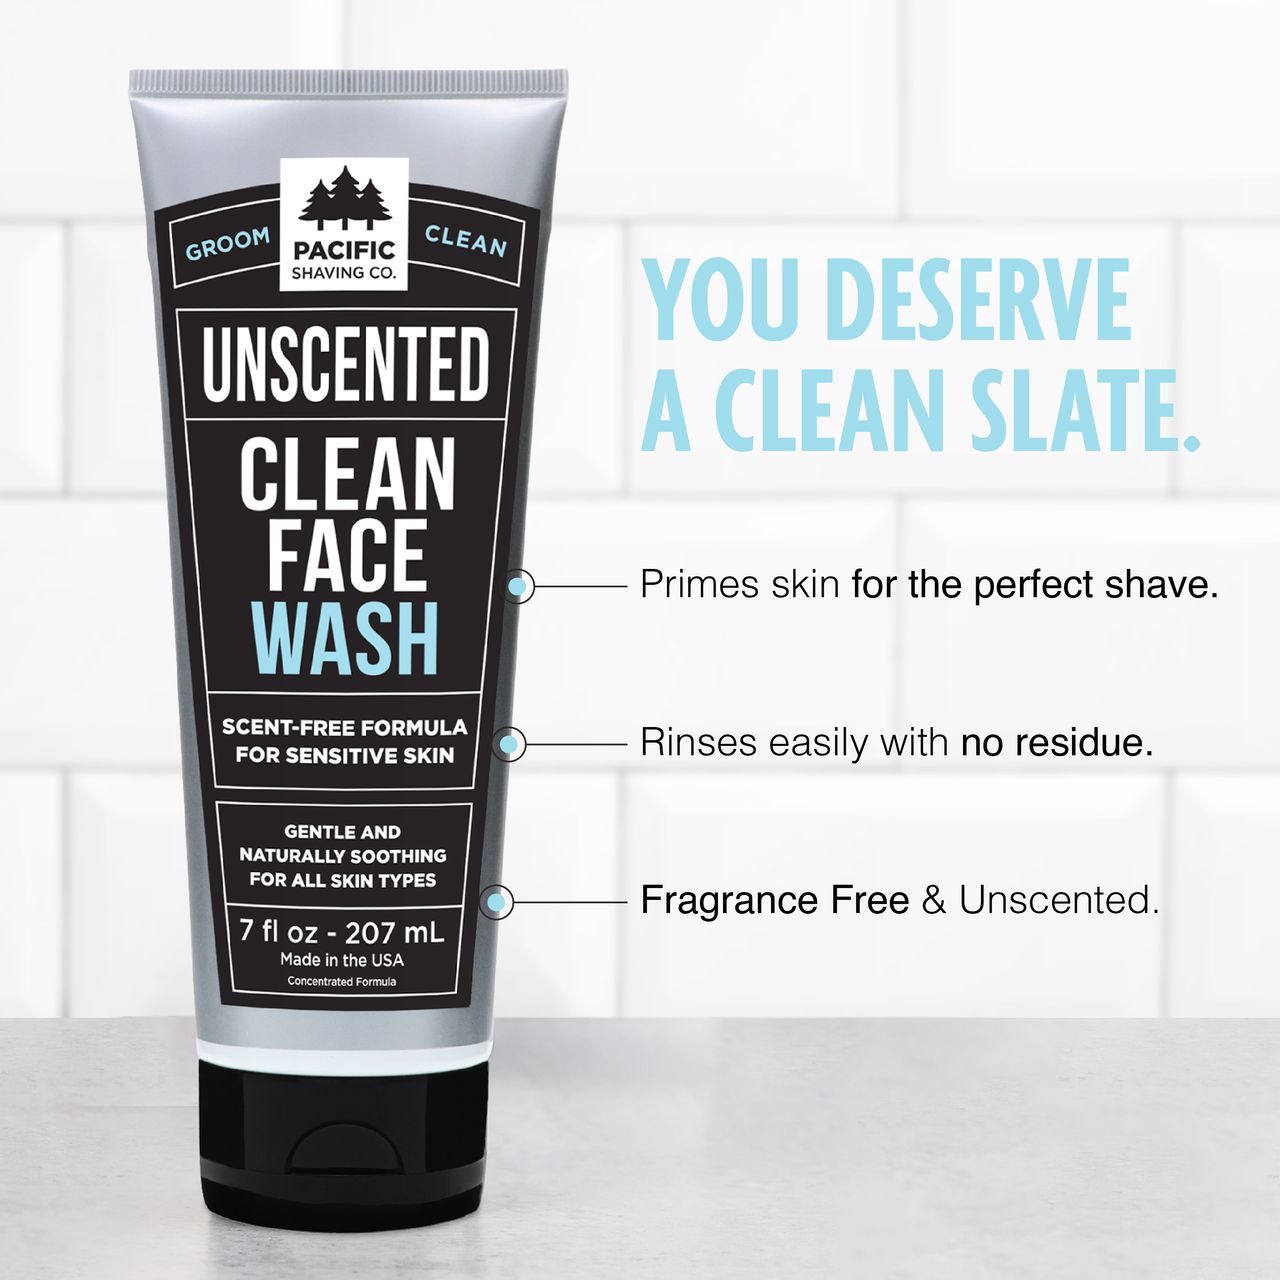 Unscented, Clean Face Wash, Unscented, Clean Shave Cream, Unscented, Clean Face Lotion